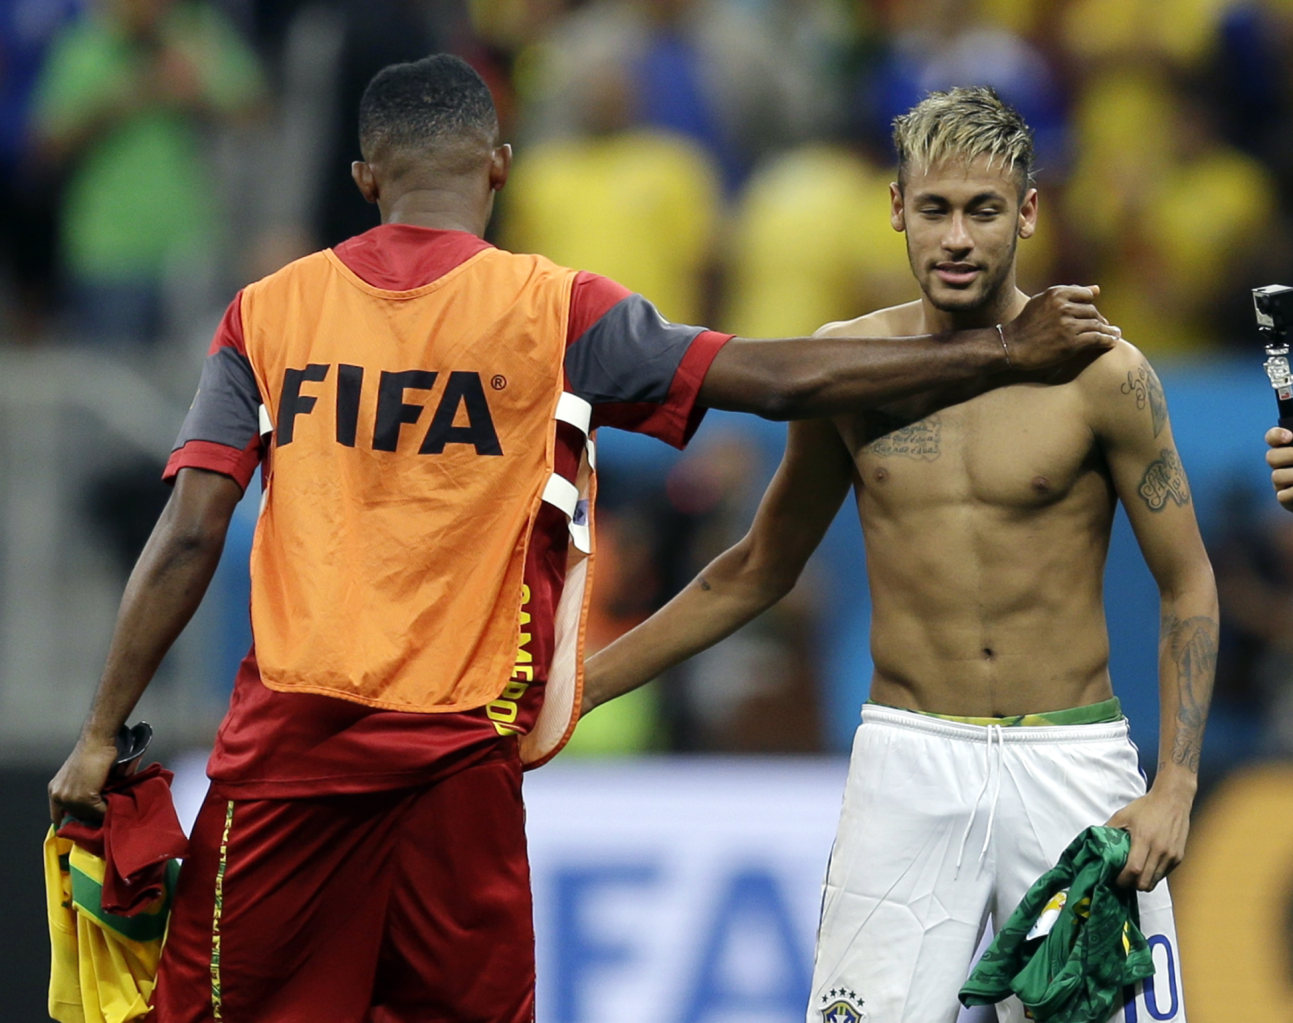 Neymar shirtless after a Brazil game in the 2014 FIFA World Cup